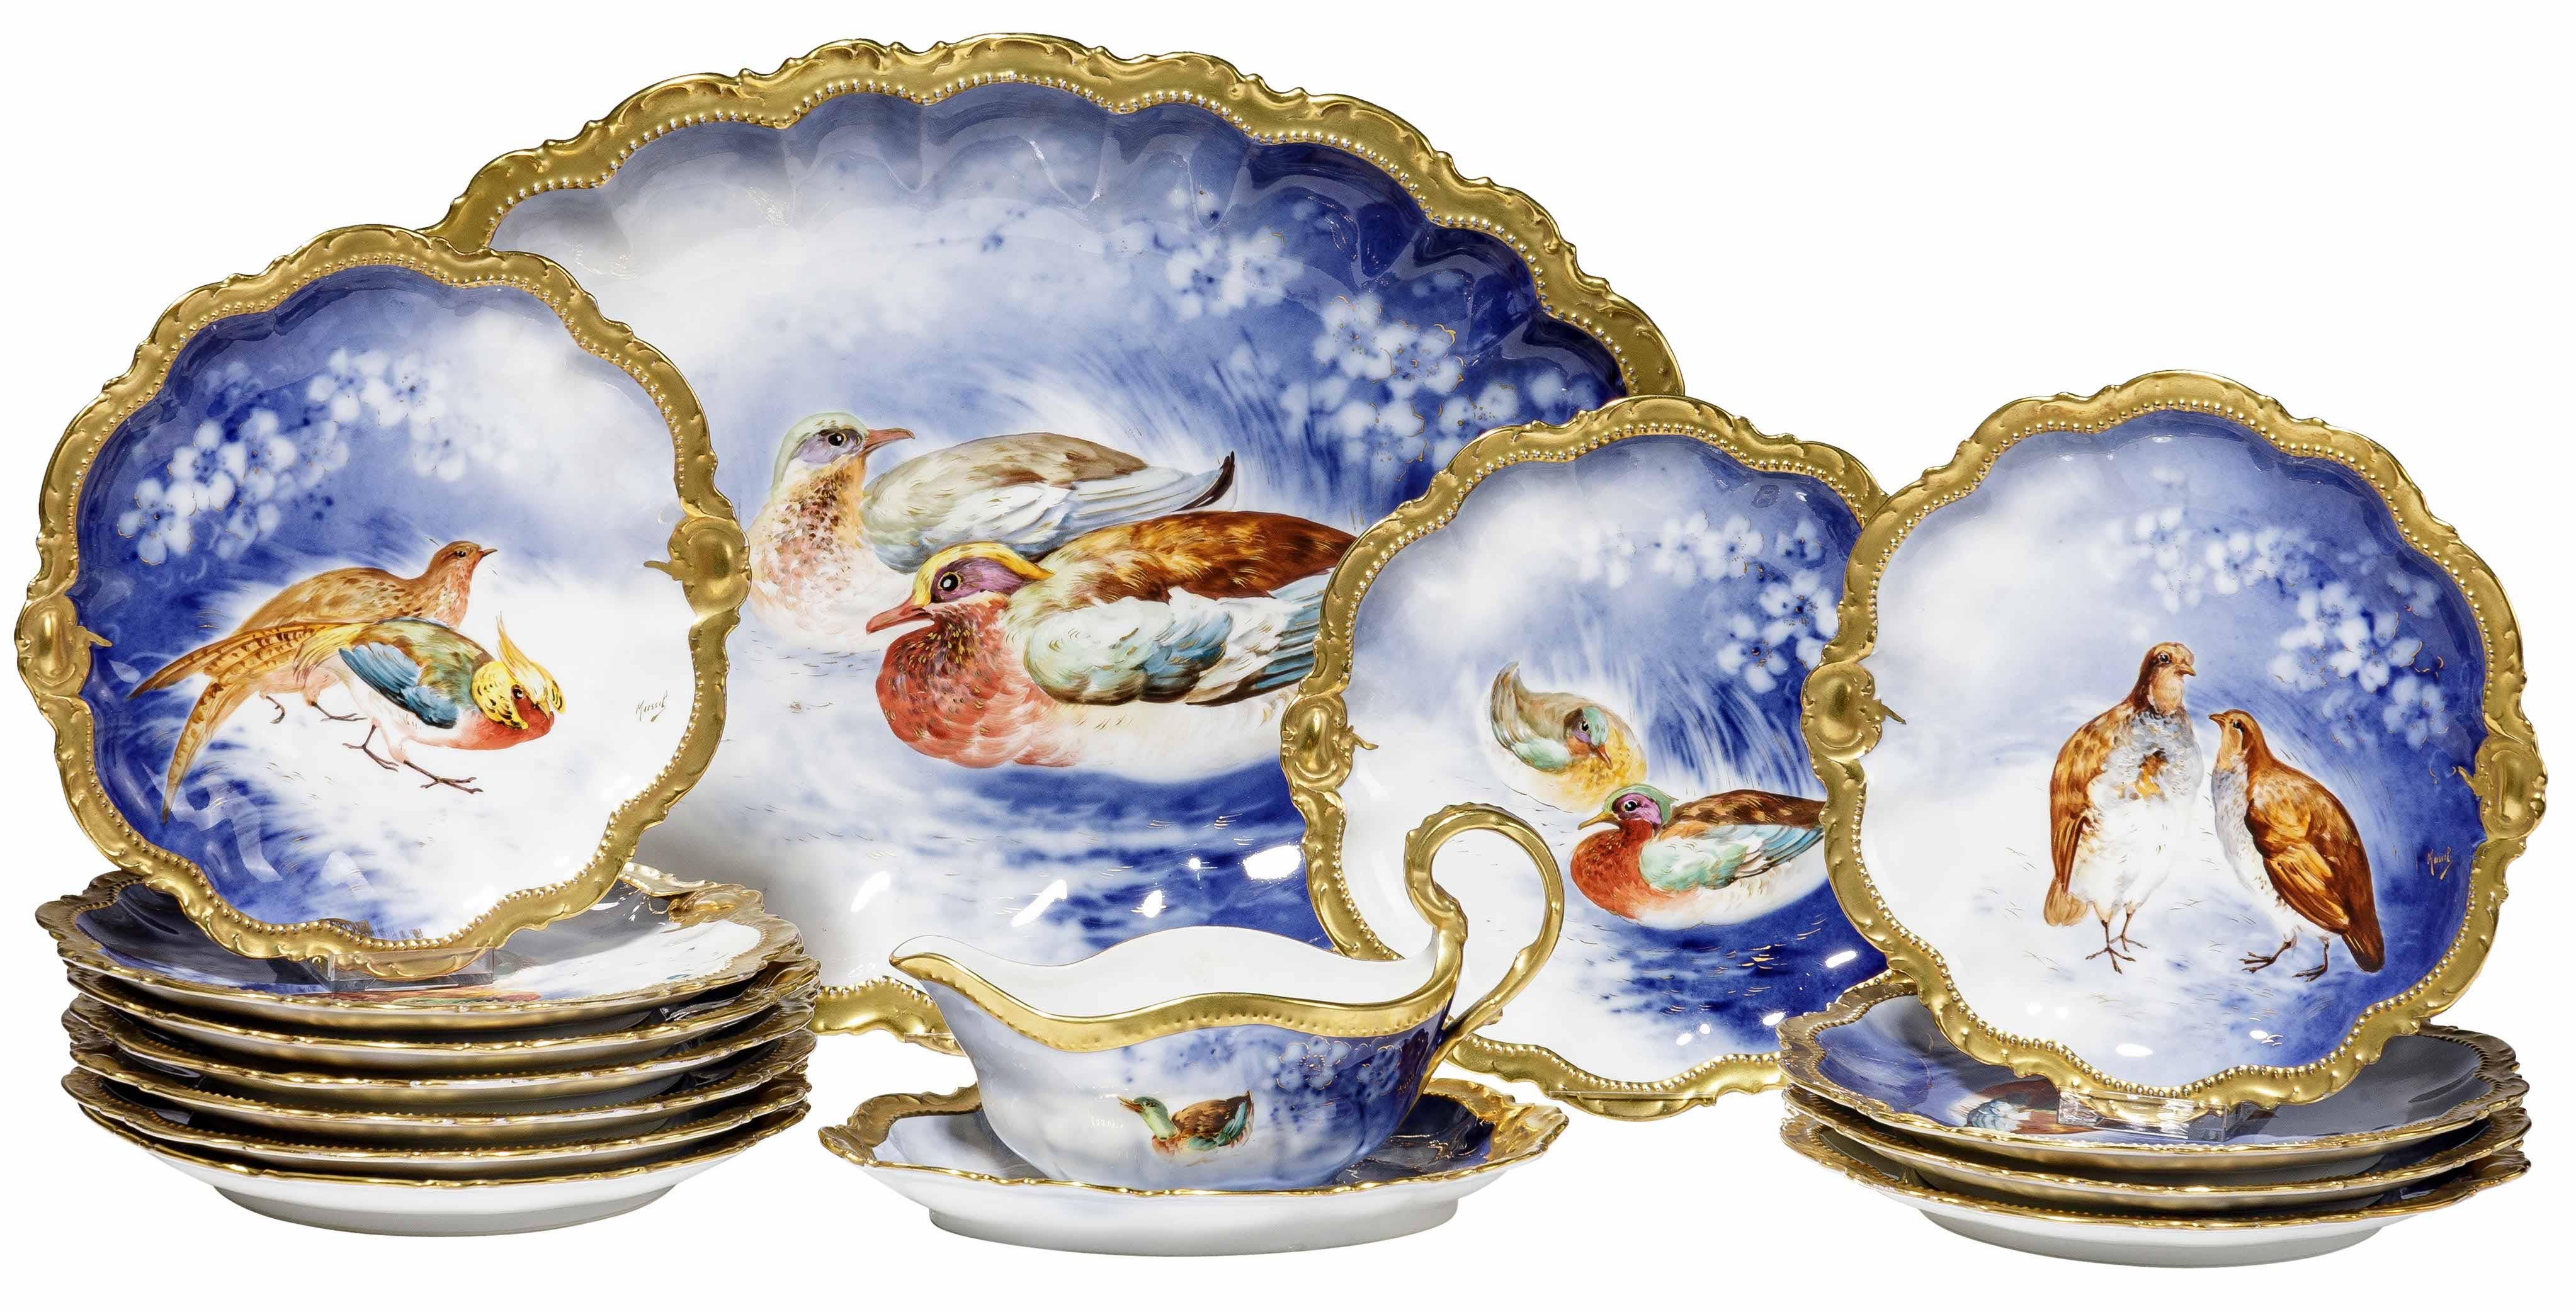 Very unusual with a deep blue sky in the background and wonderful colors, this antique Limoges set for 12 people is made with the finest quality Limoges porcelain by the Coronet Company, active under this name between 1881-1976. Paintings of the set